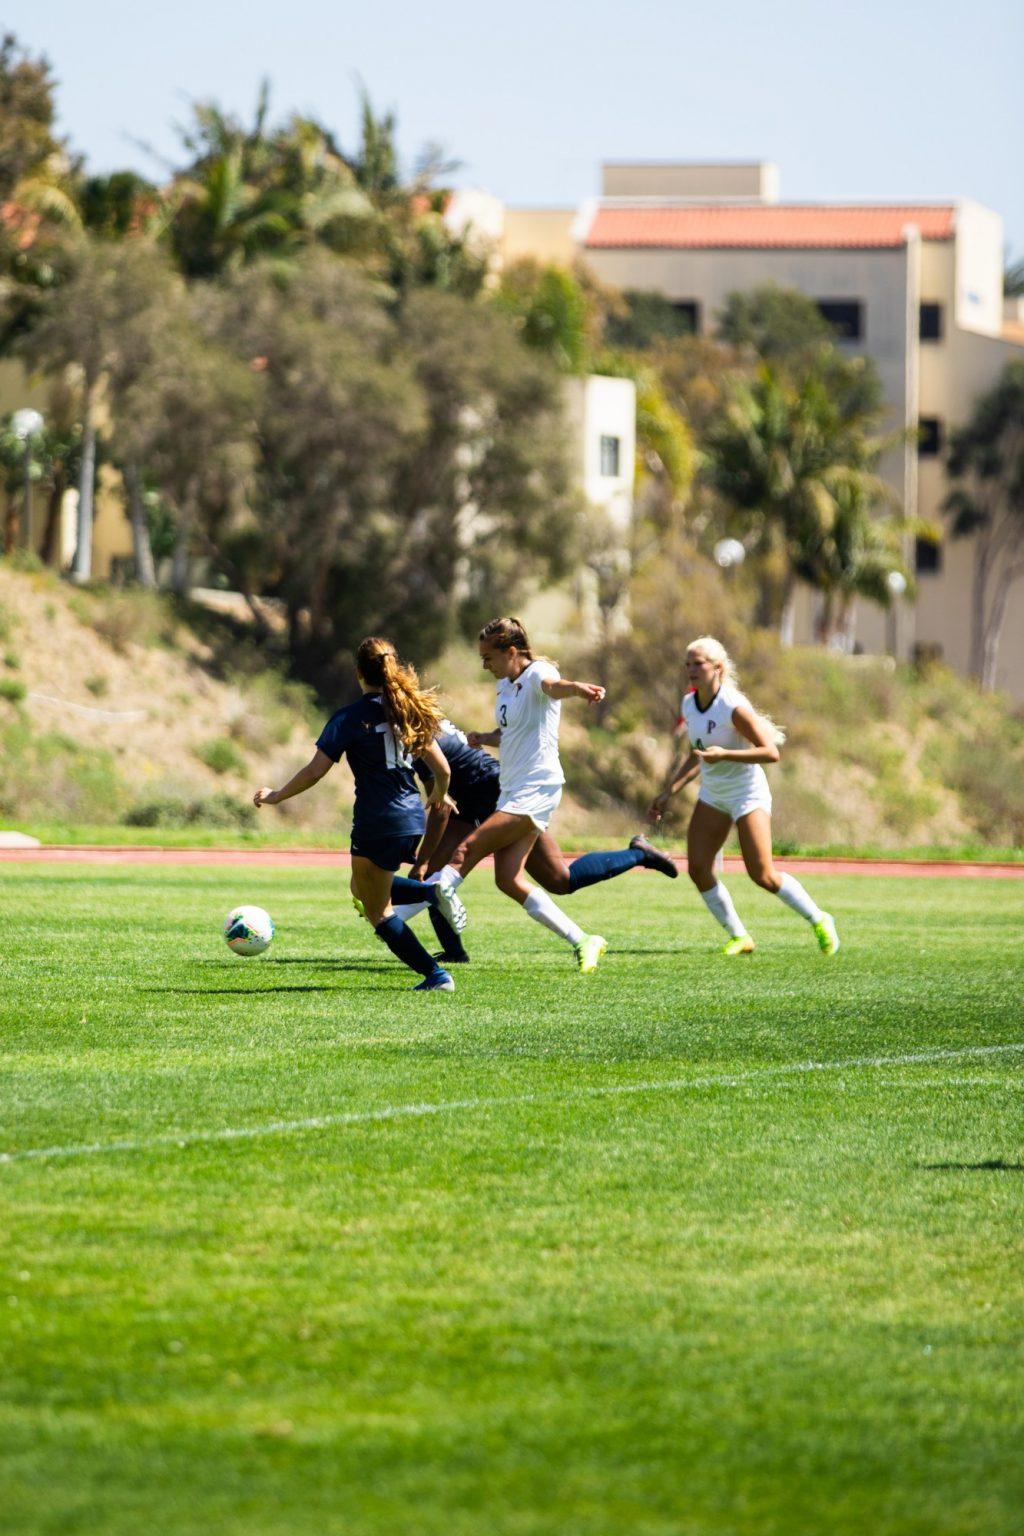 Senior forward Aliyah Satterfield shoots with her left foot between two San Diego defenders in the 88th minute Saturday in Malibu. Satterfield scored on the play, extending the Waves' lead to 7-0.